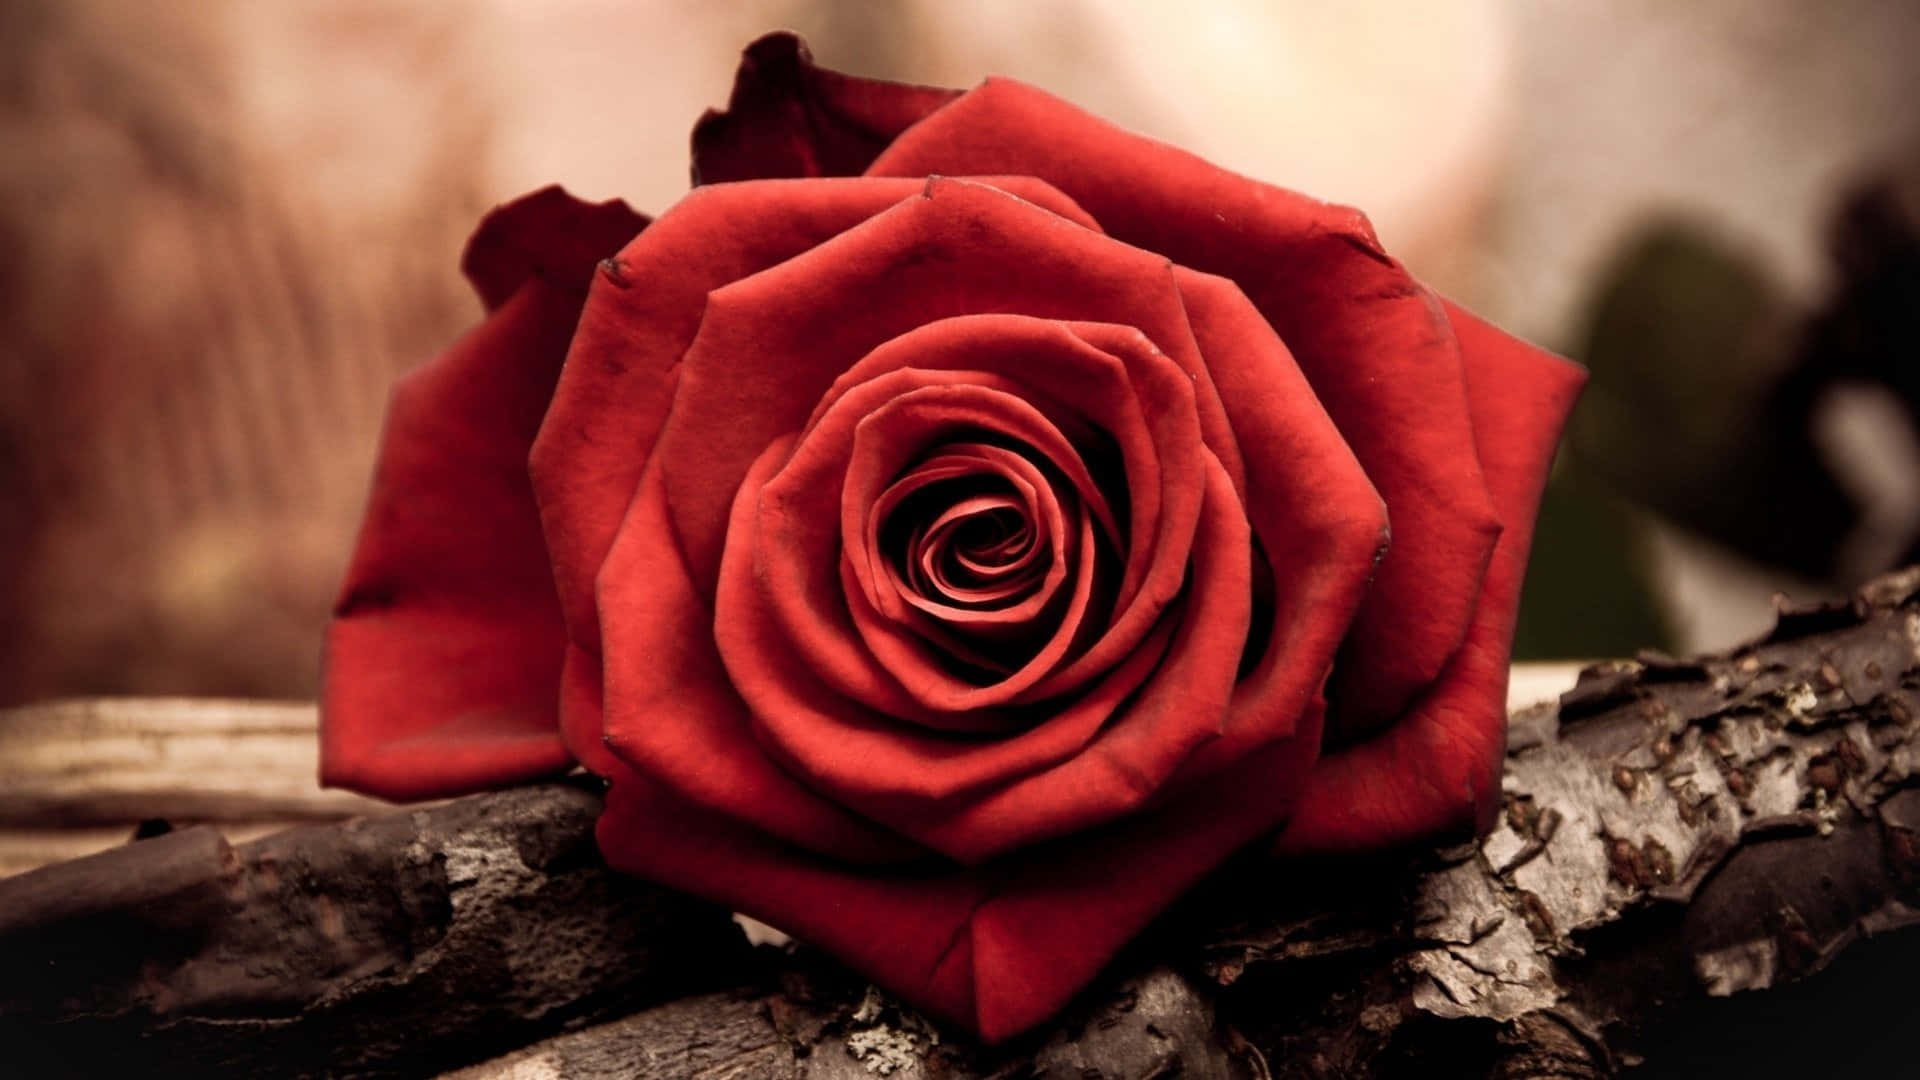 A beautiful bloom of red roses